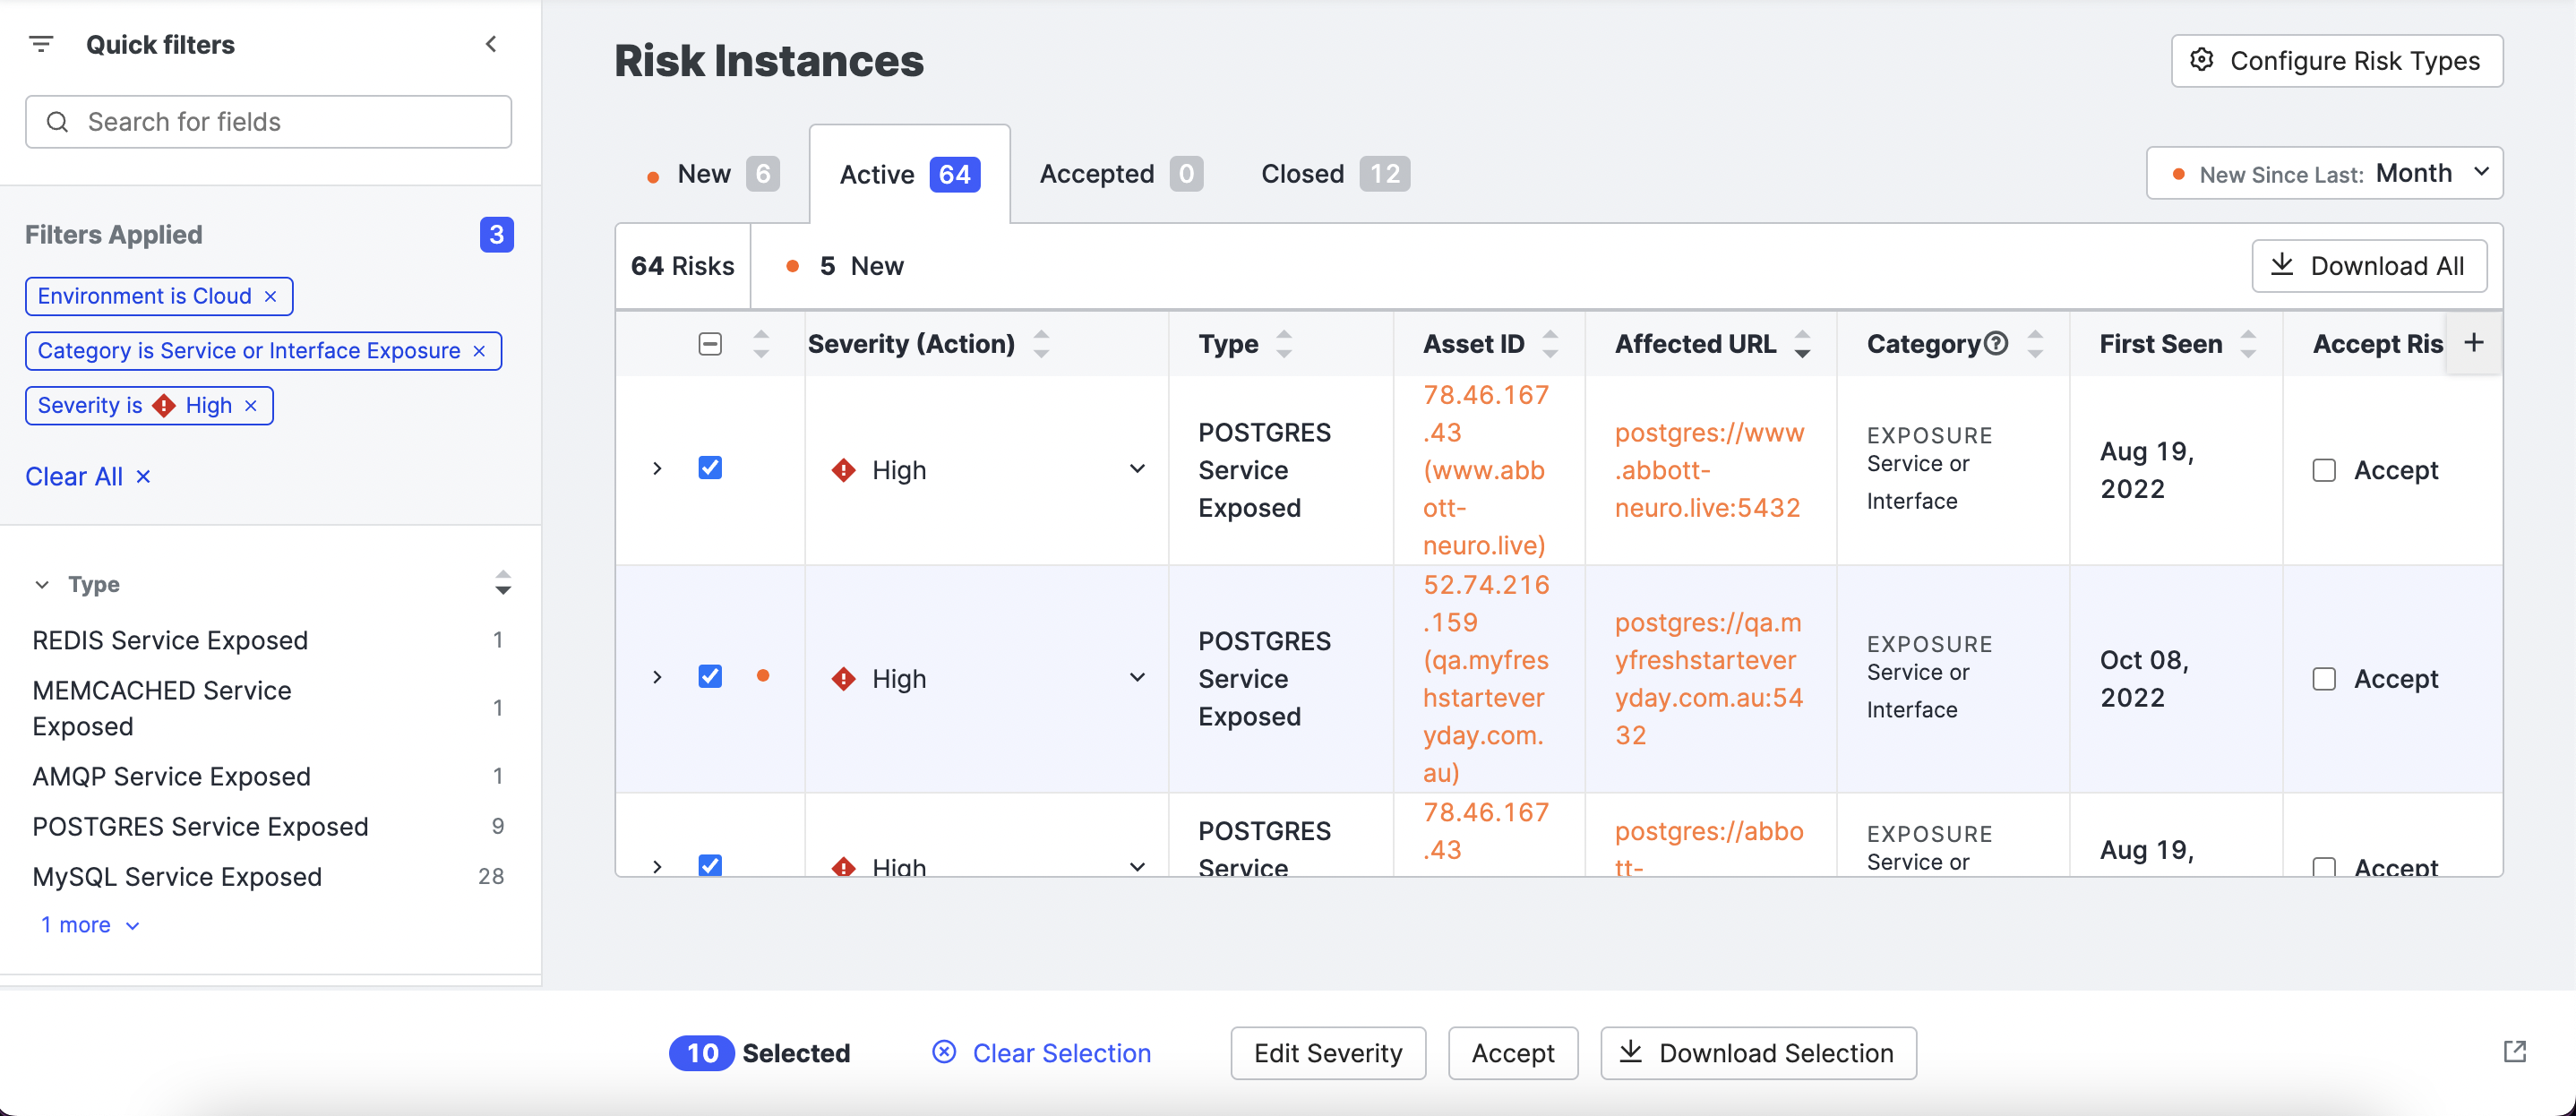 Download a CSV of selected risk instances